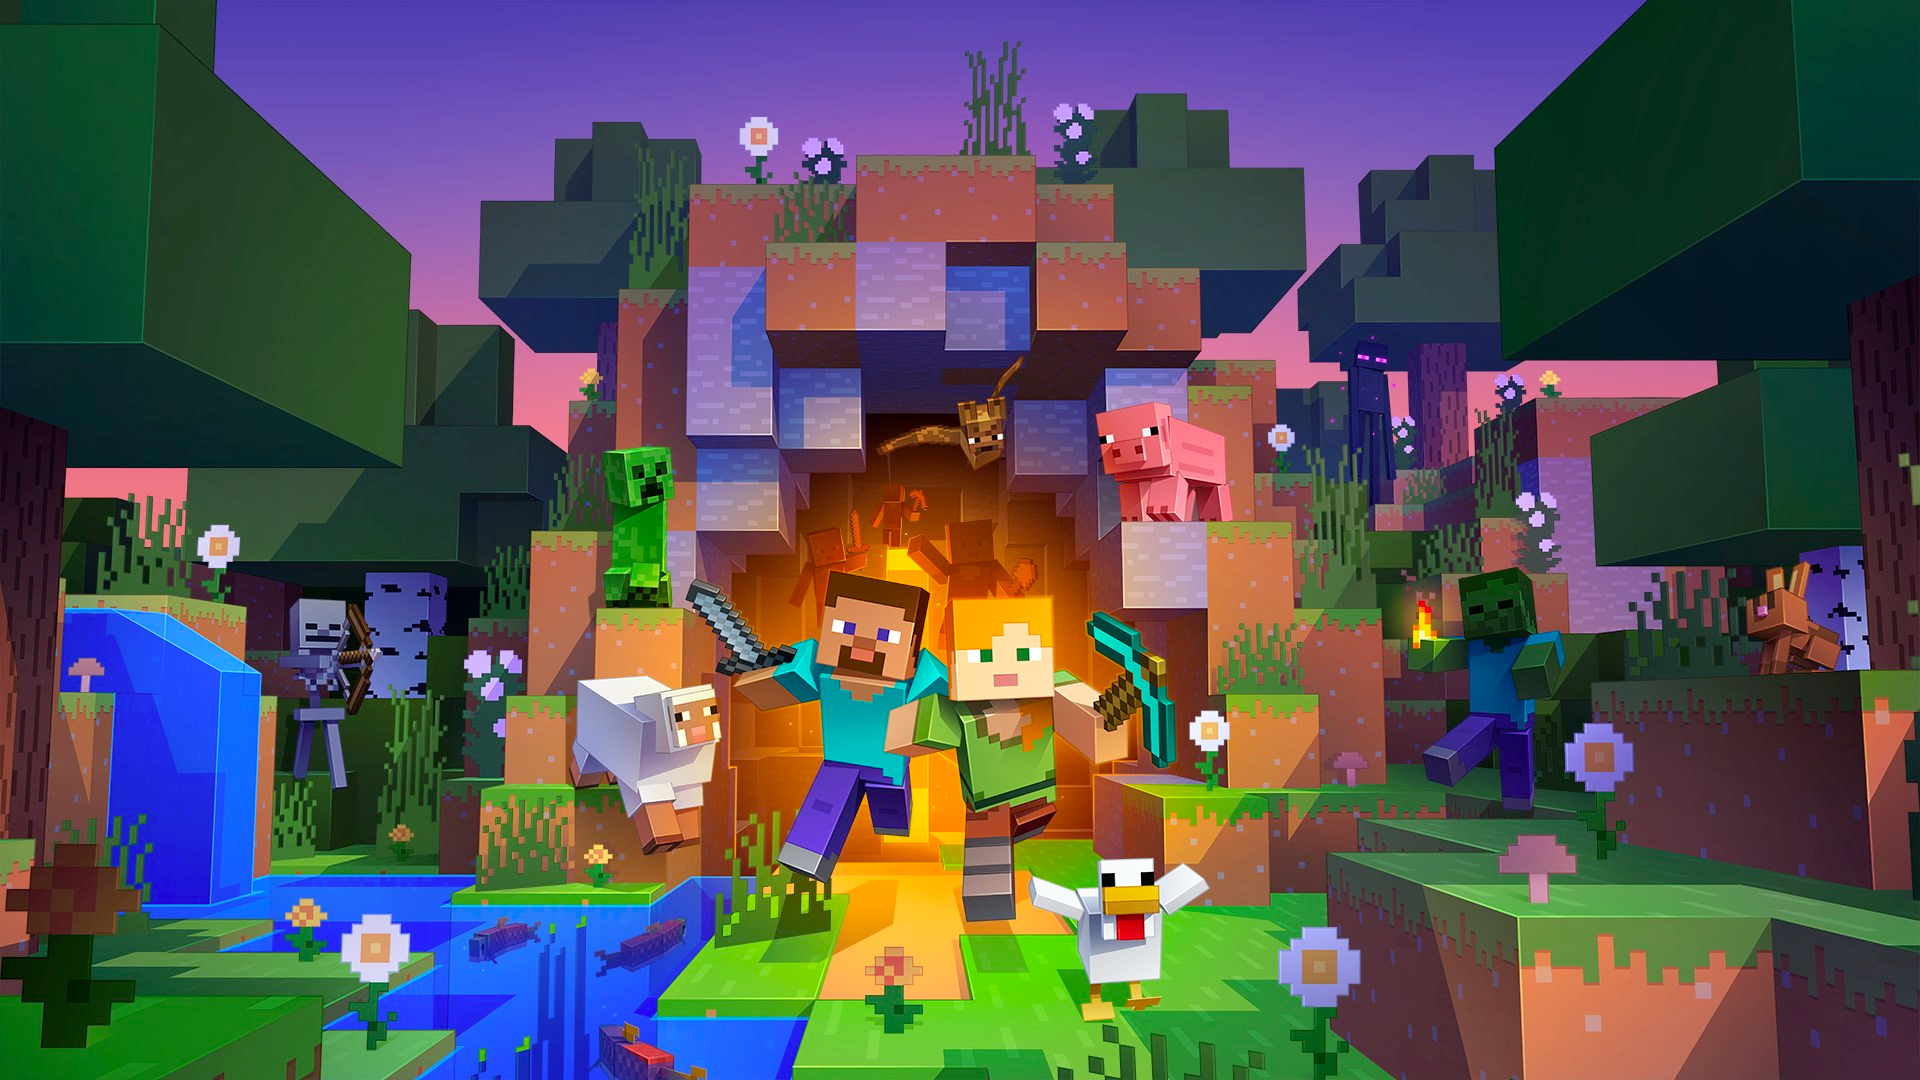 Artwork of Minecraft featuring Steve and Alex emerging from a cave, surrounded by wildlife and zombies